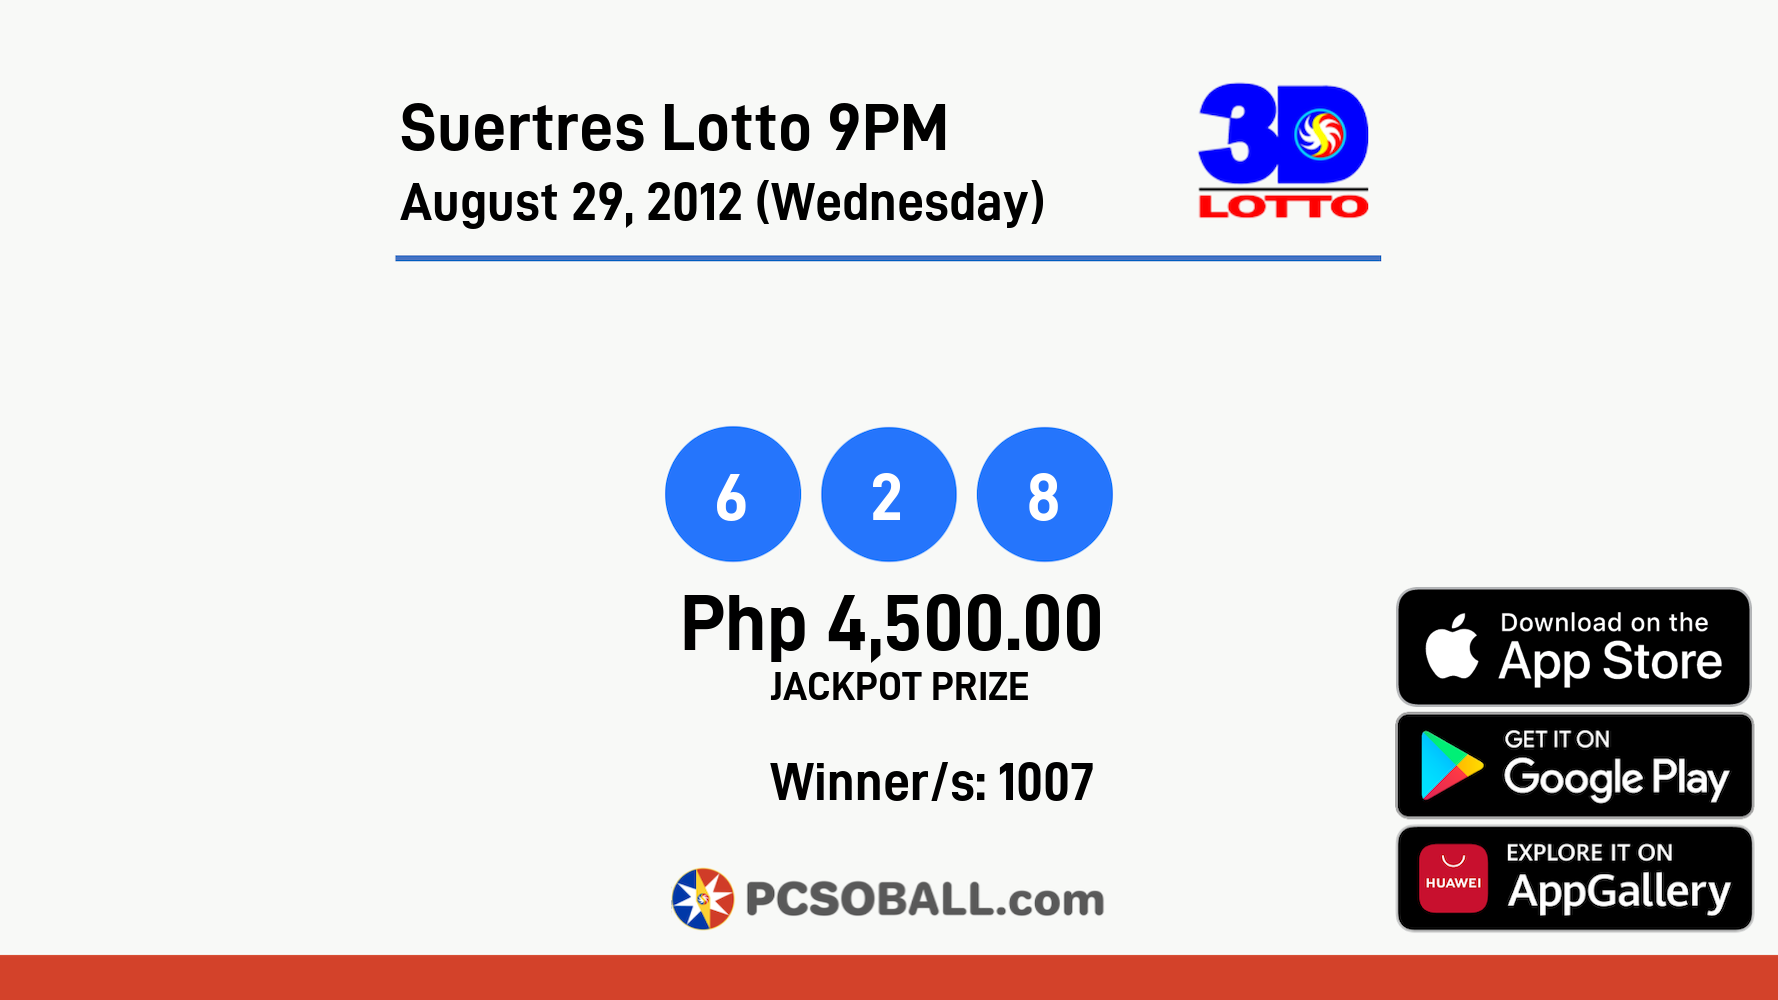 Suertres Lotto 9PM August 29, 2012 (Wednesday) Result